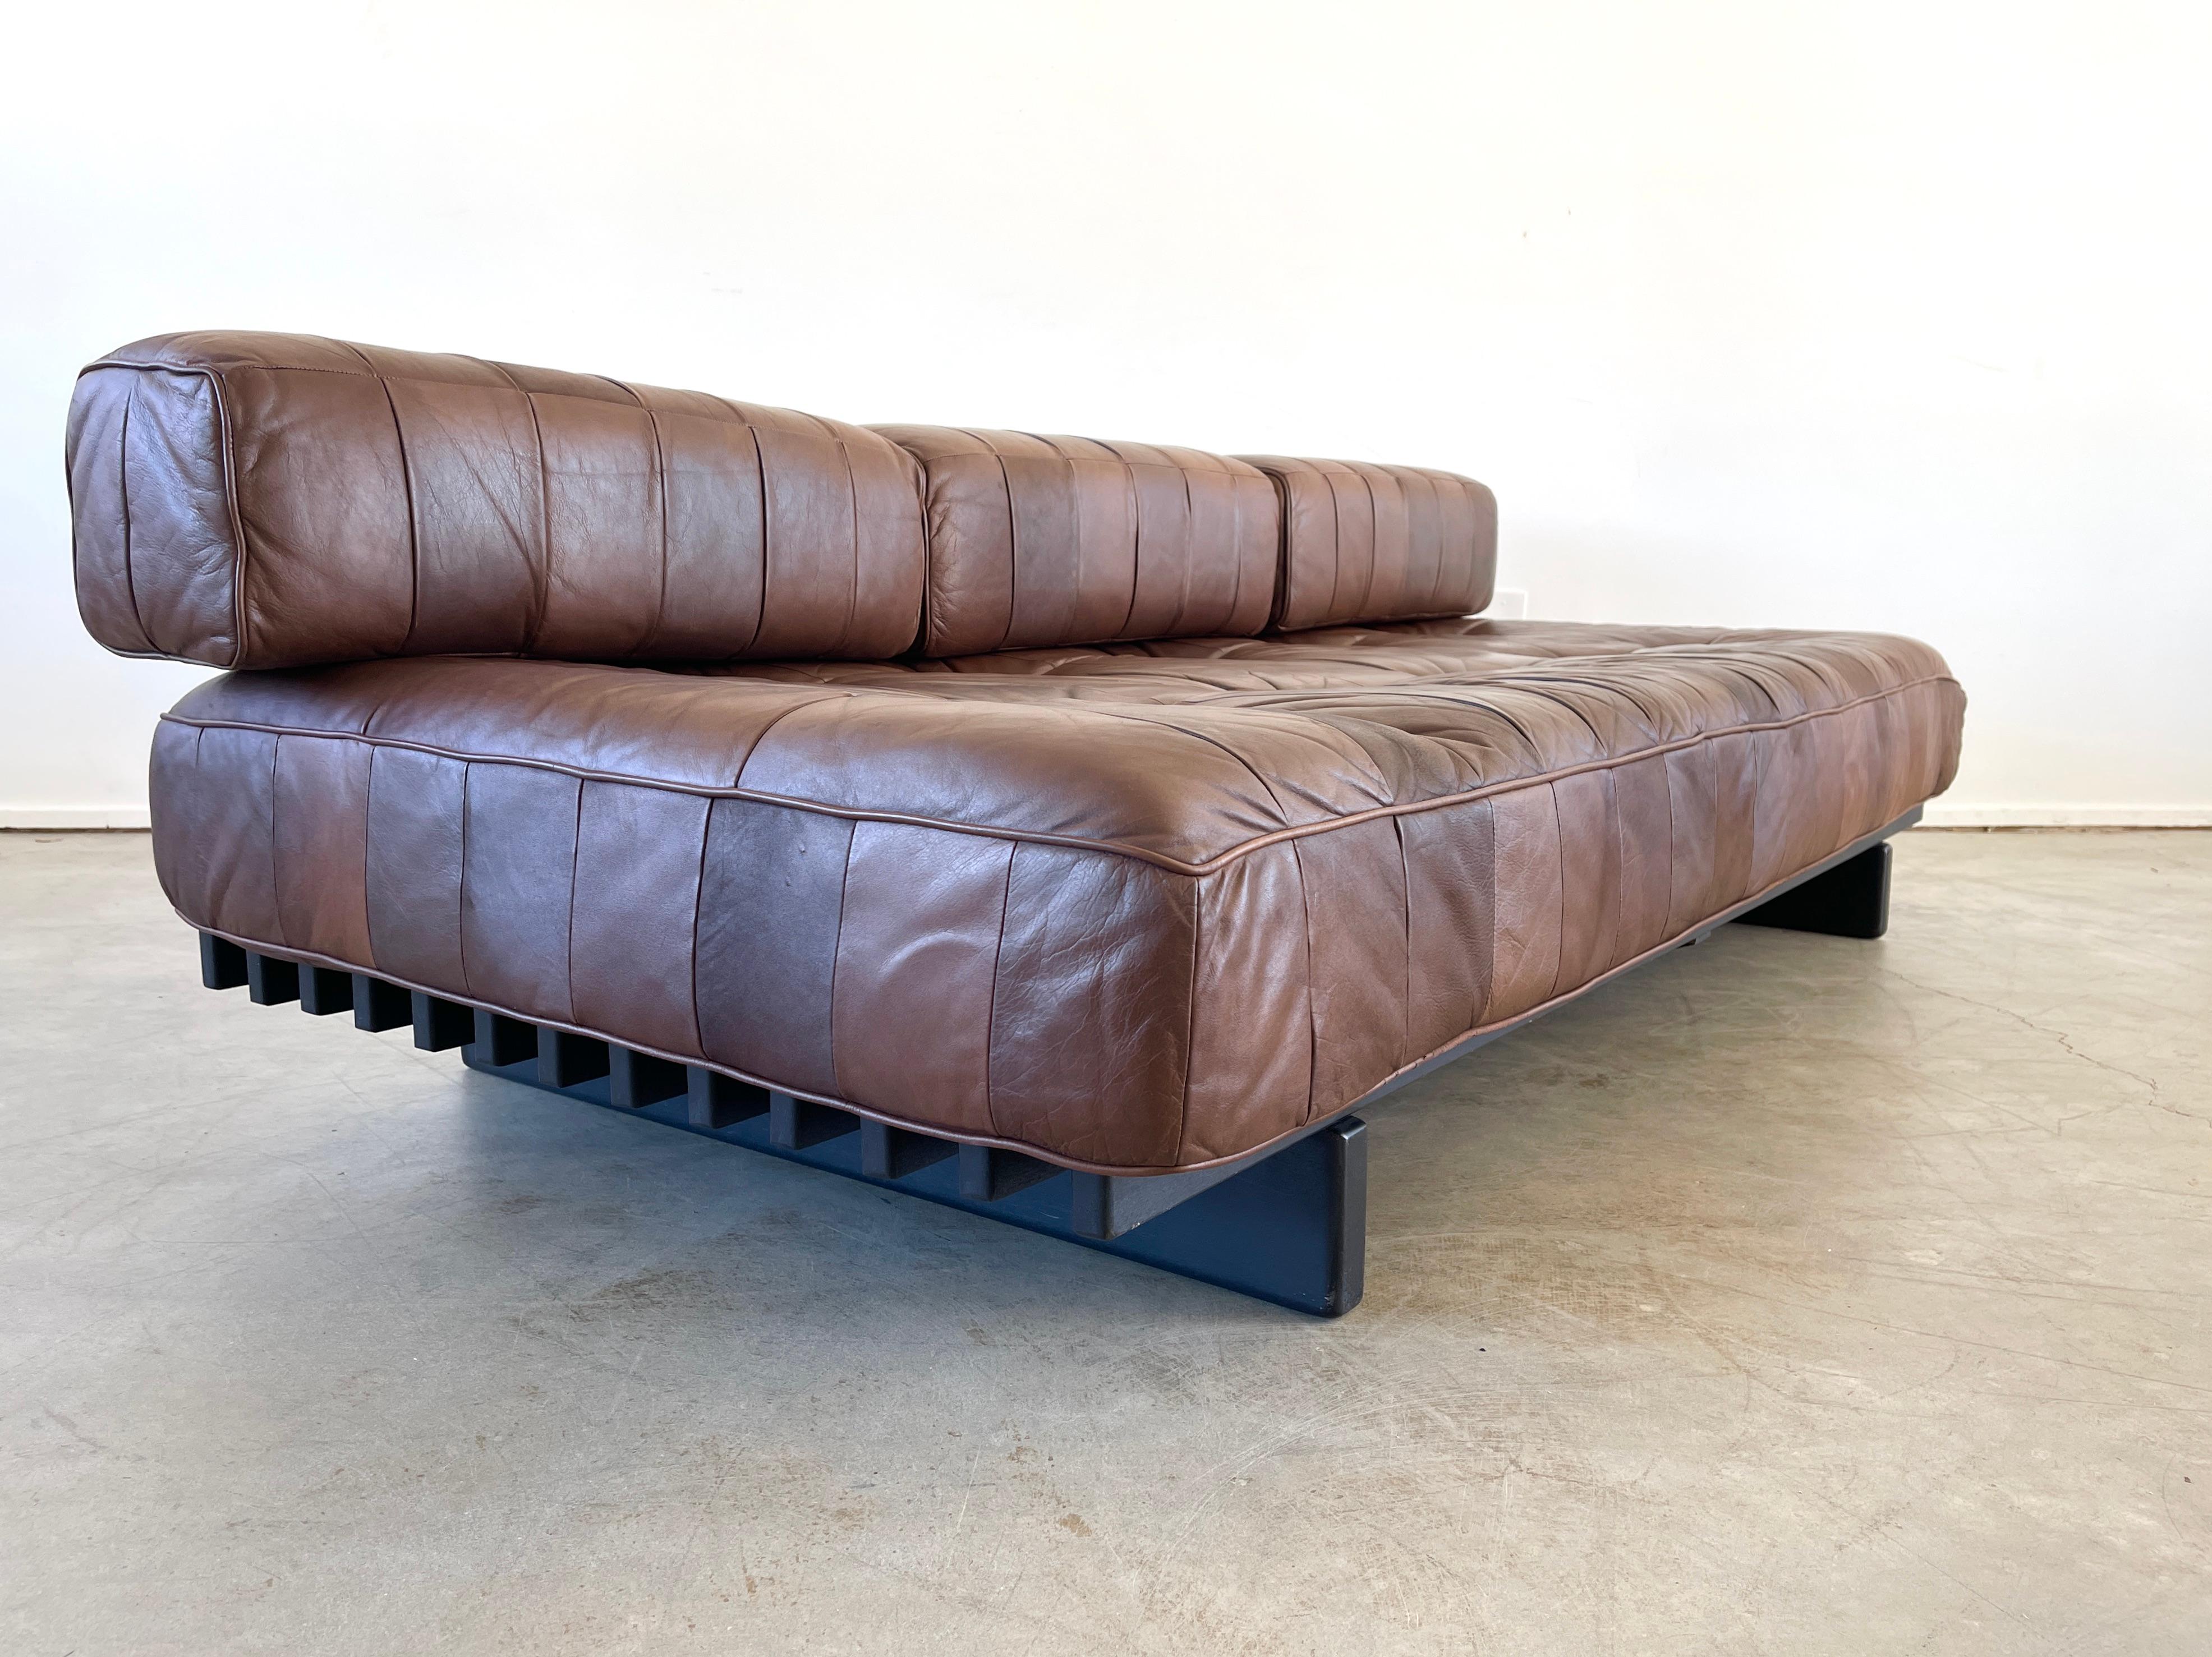 Wonderful De Sede daybed DS 80 in chocolate brown leather
Signature patchwork leather has wonderful patina and sits on a black slatted wood frame.